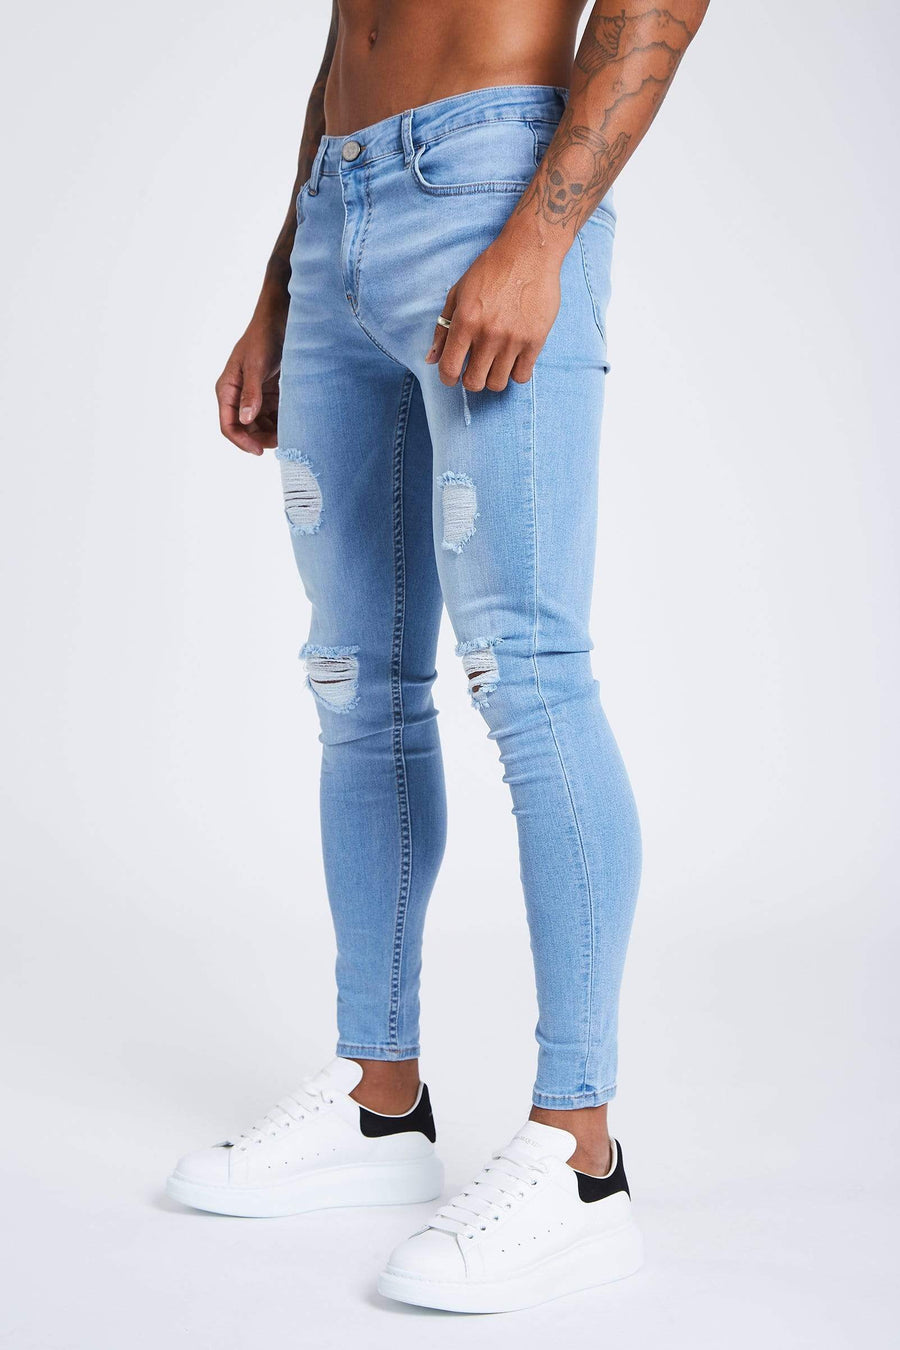 Light Blue Jeans - Ripped & Repaired